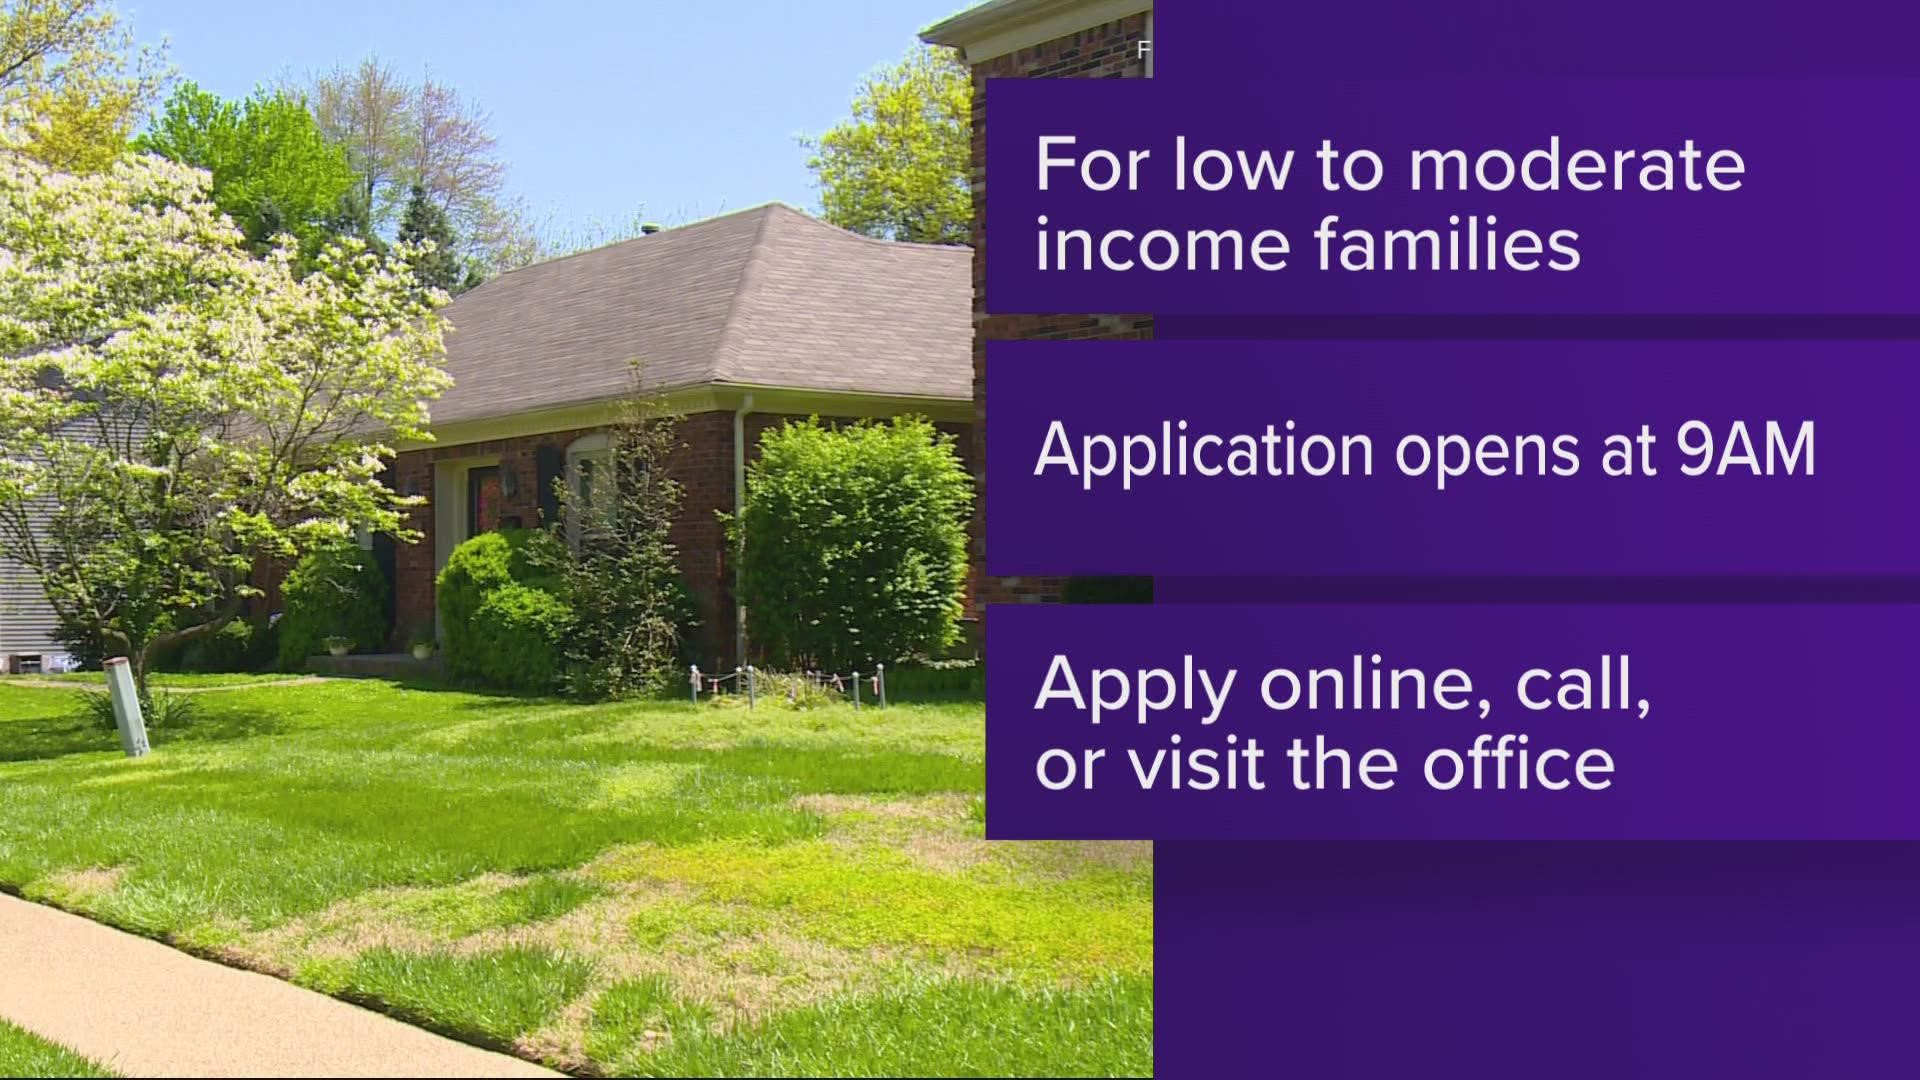 The program provides repairs for families with low- to moderate-income.